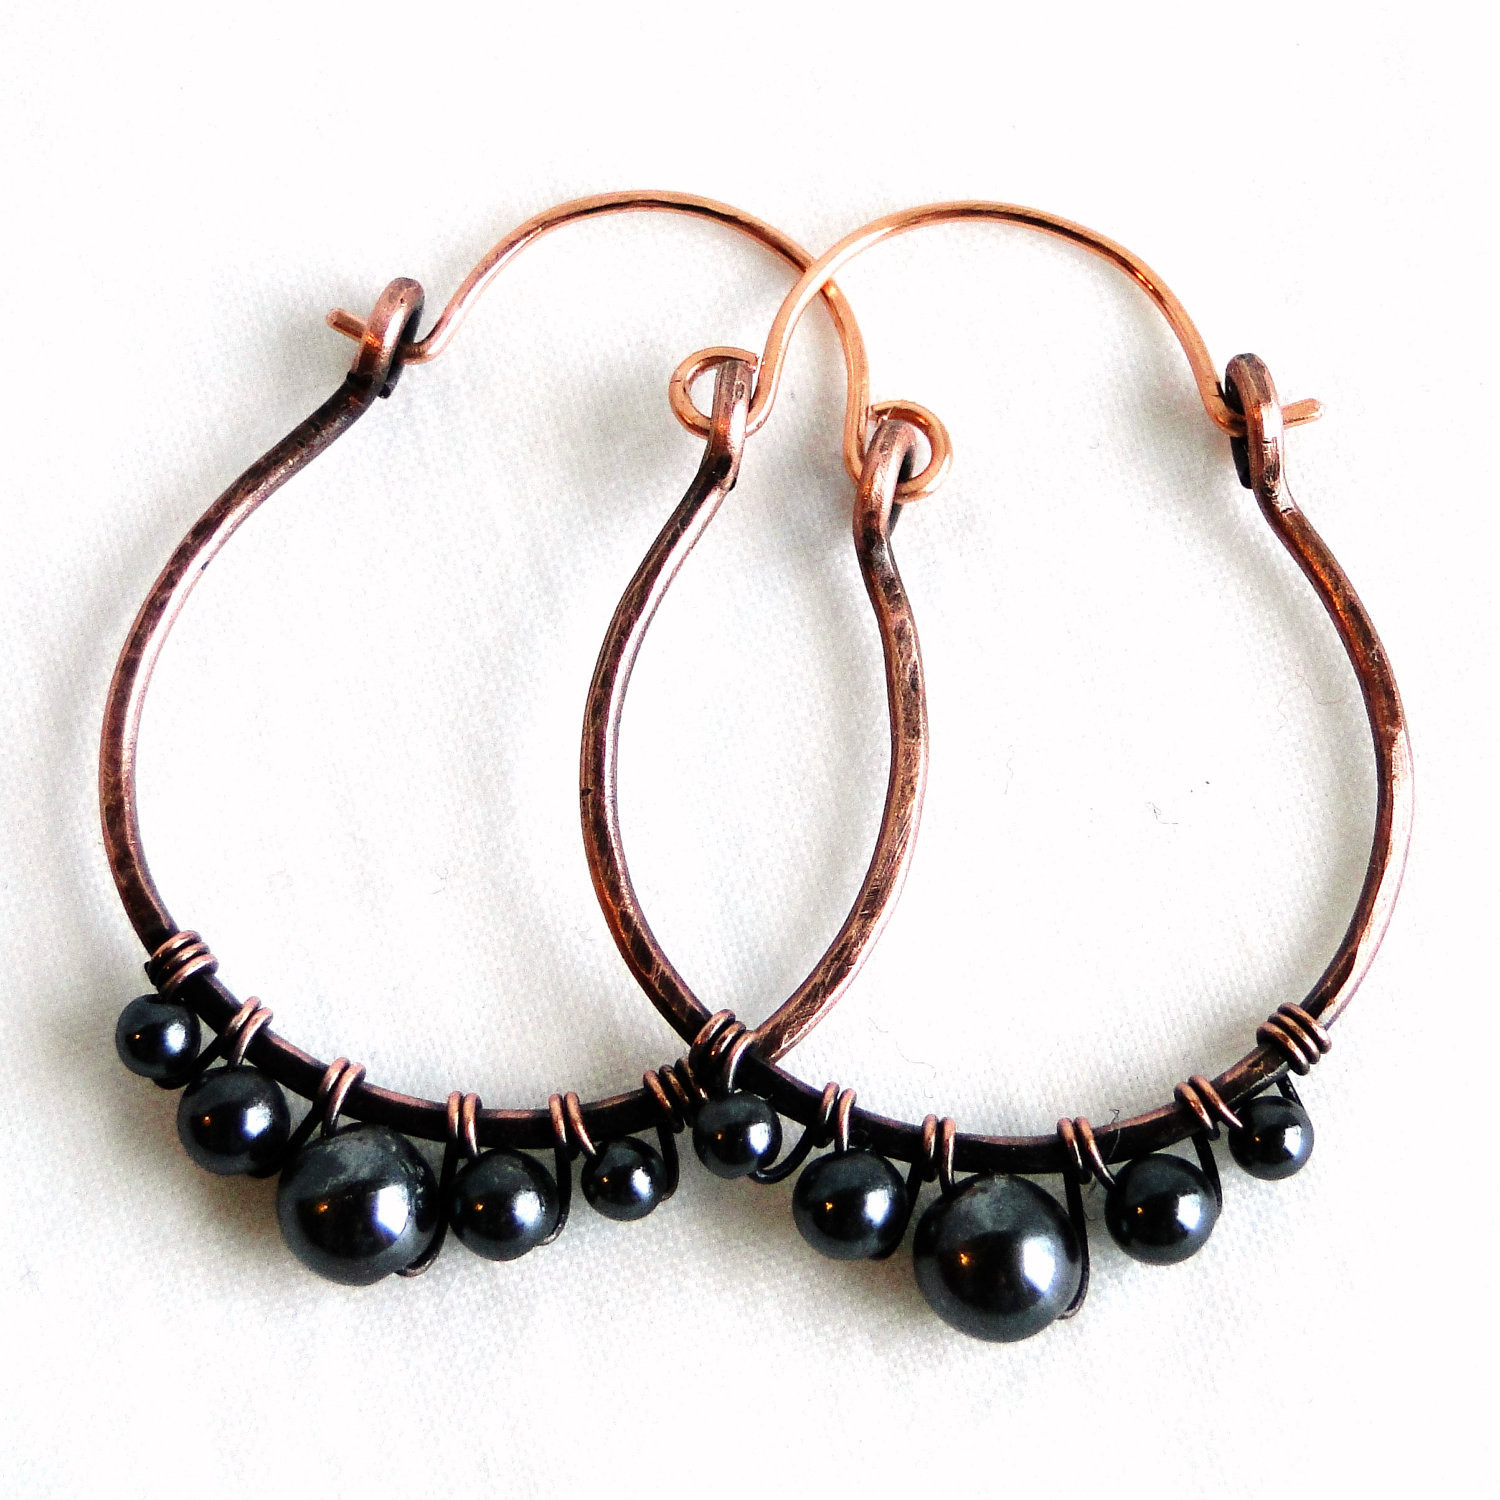 Handmade Copper Earrings
 Hematite and Antiqued Copper Earrings Handcrafted Jewelry